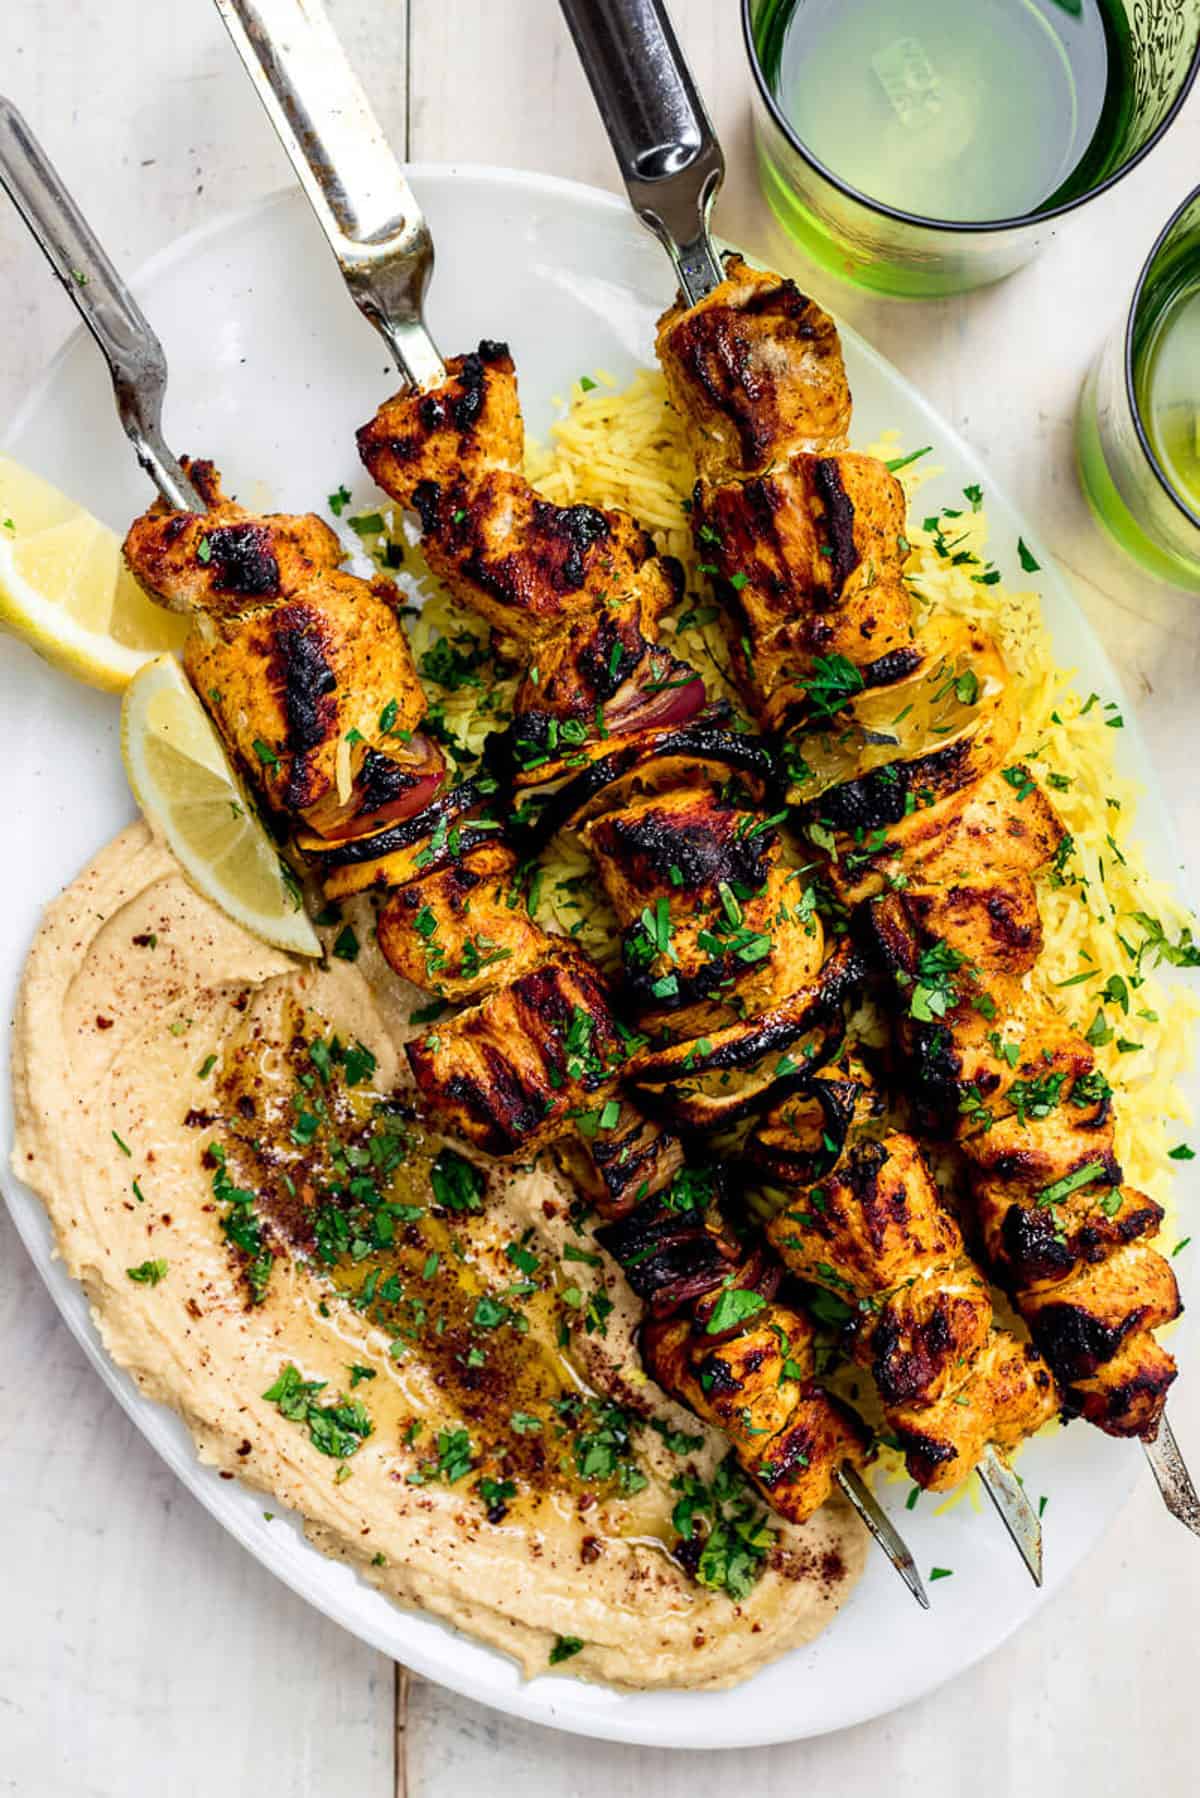 Chicken shawarma skewers are served on top of creamy homemade hummus and saffron rice.